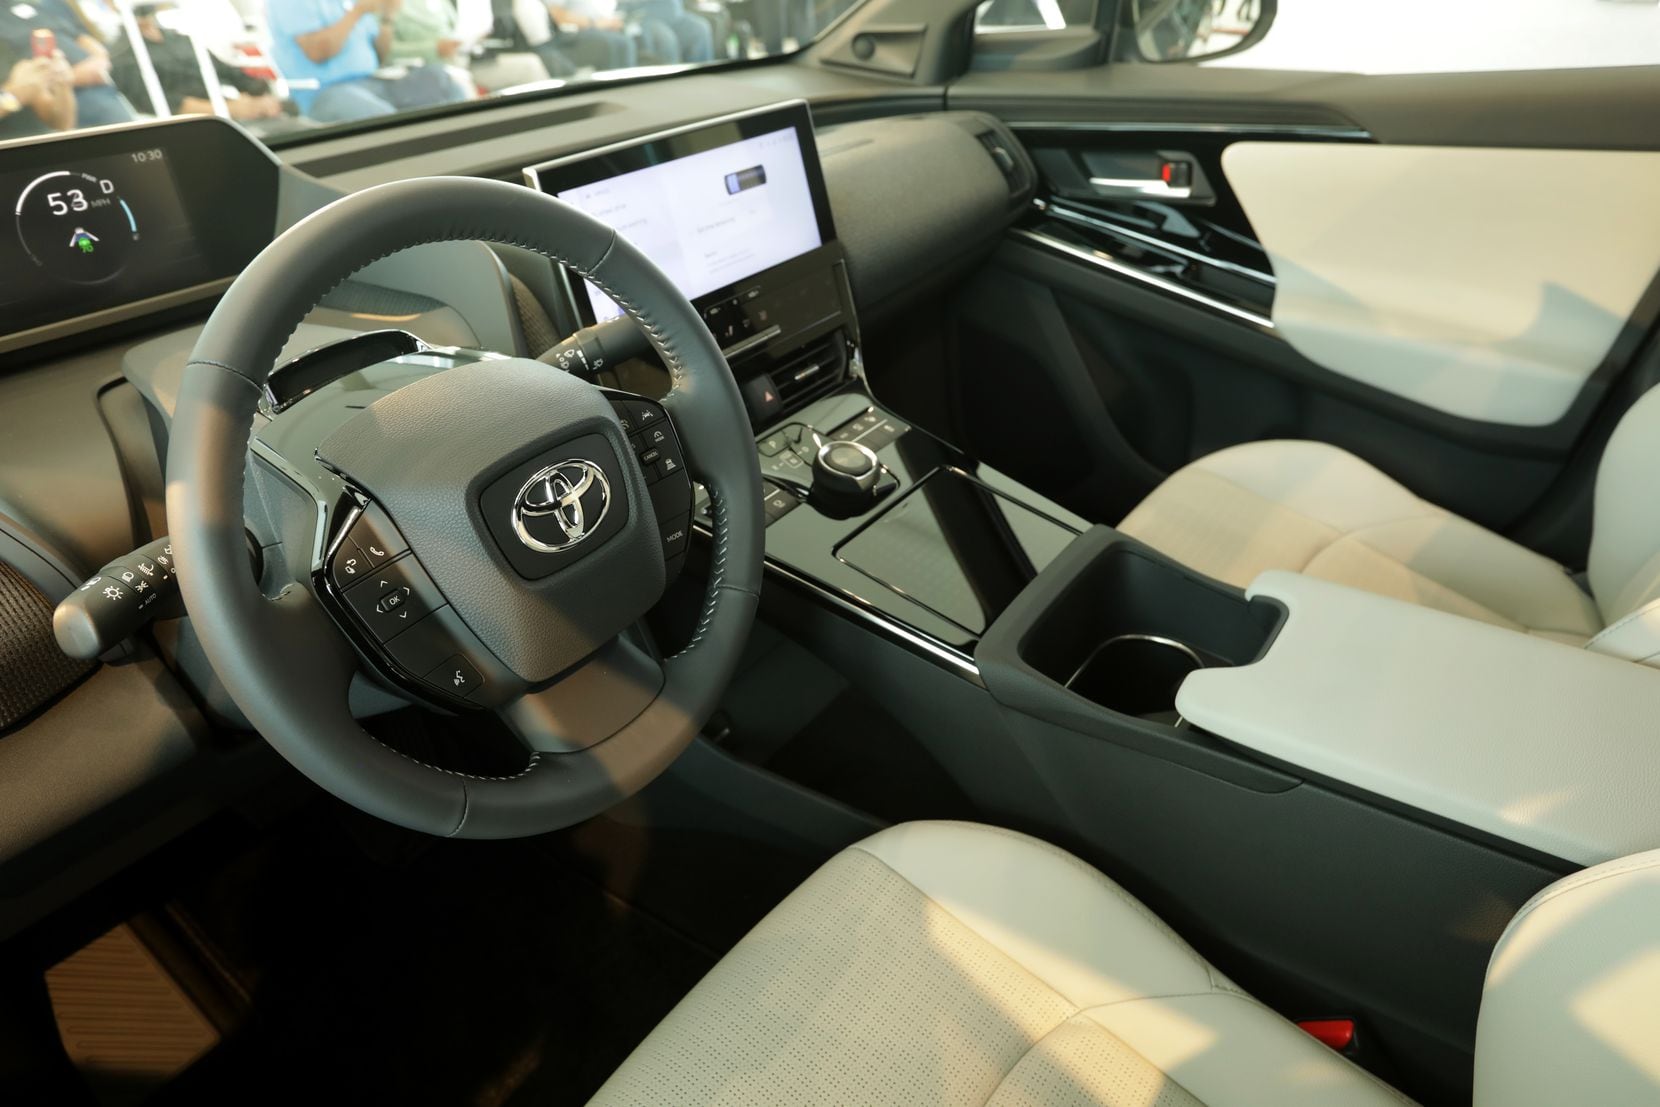 Toyota showed off the interior of the new Toyota BZ4X concept vehicle on Wednesday. The BZ4X...